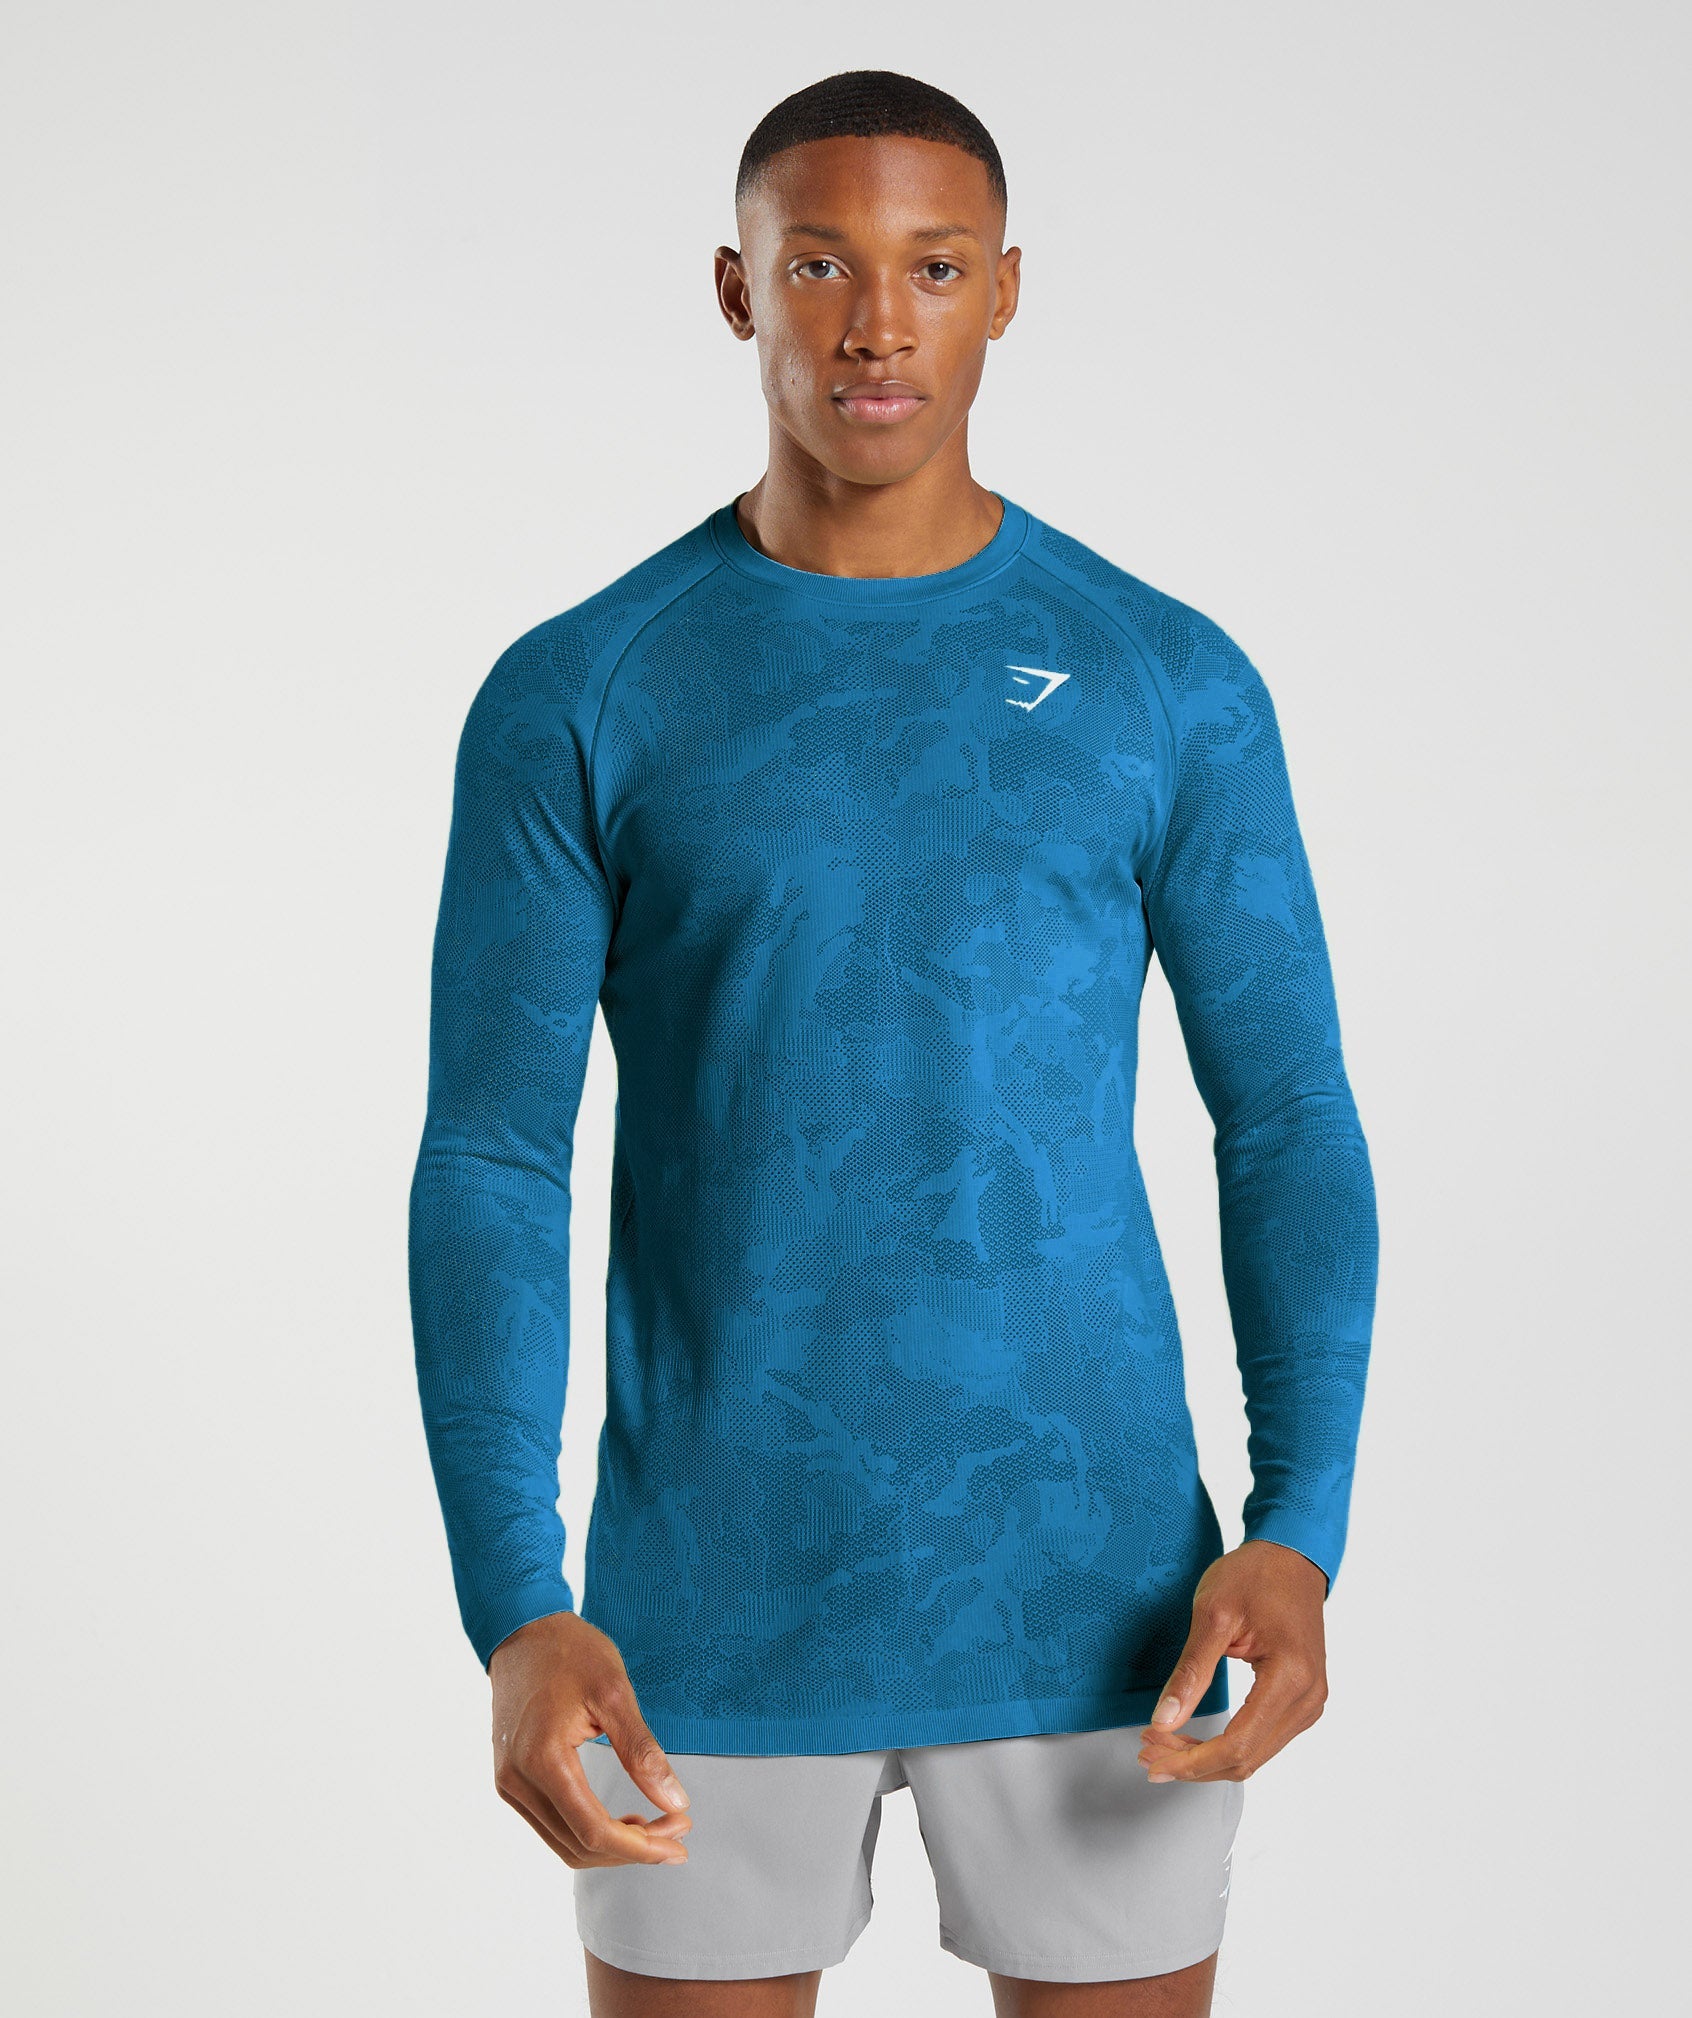 Gymshark Muscle T-Shirts for Men